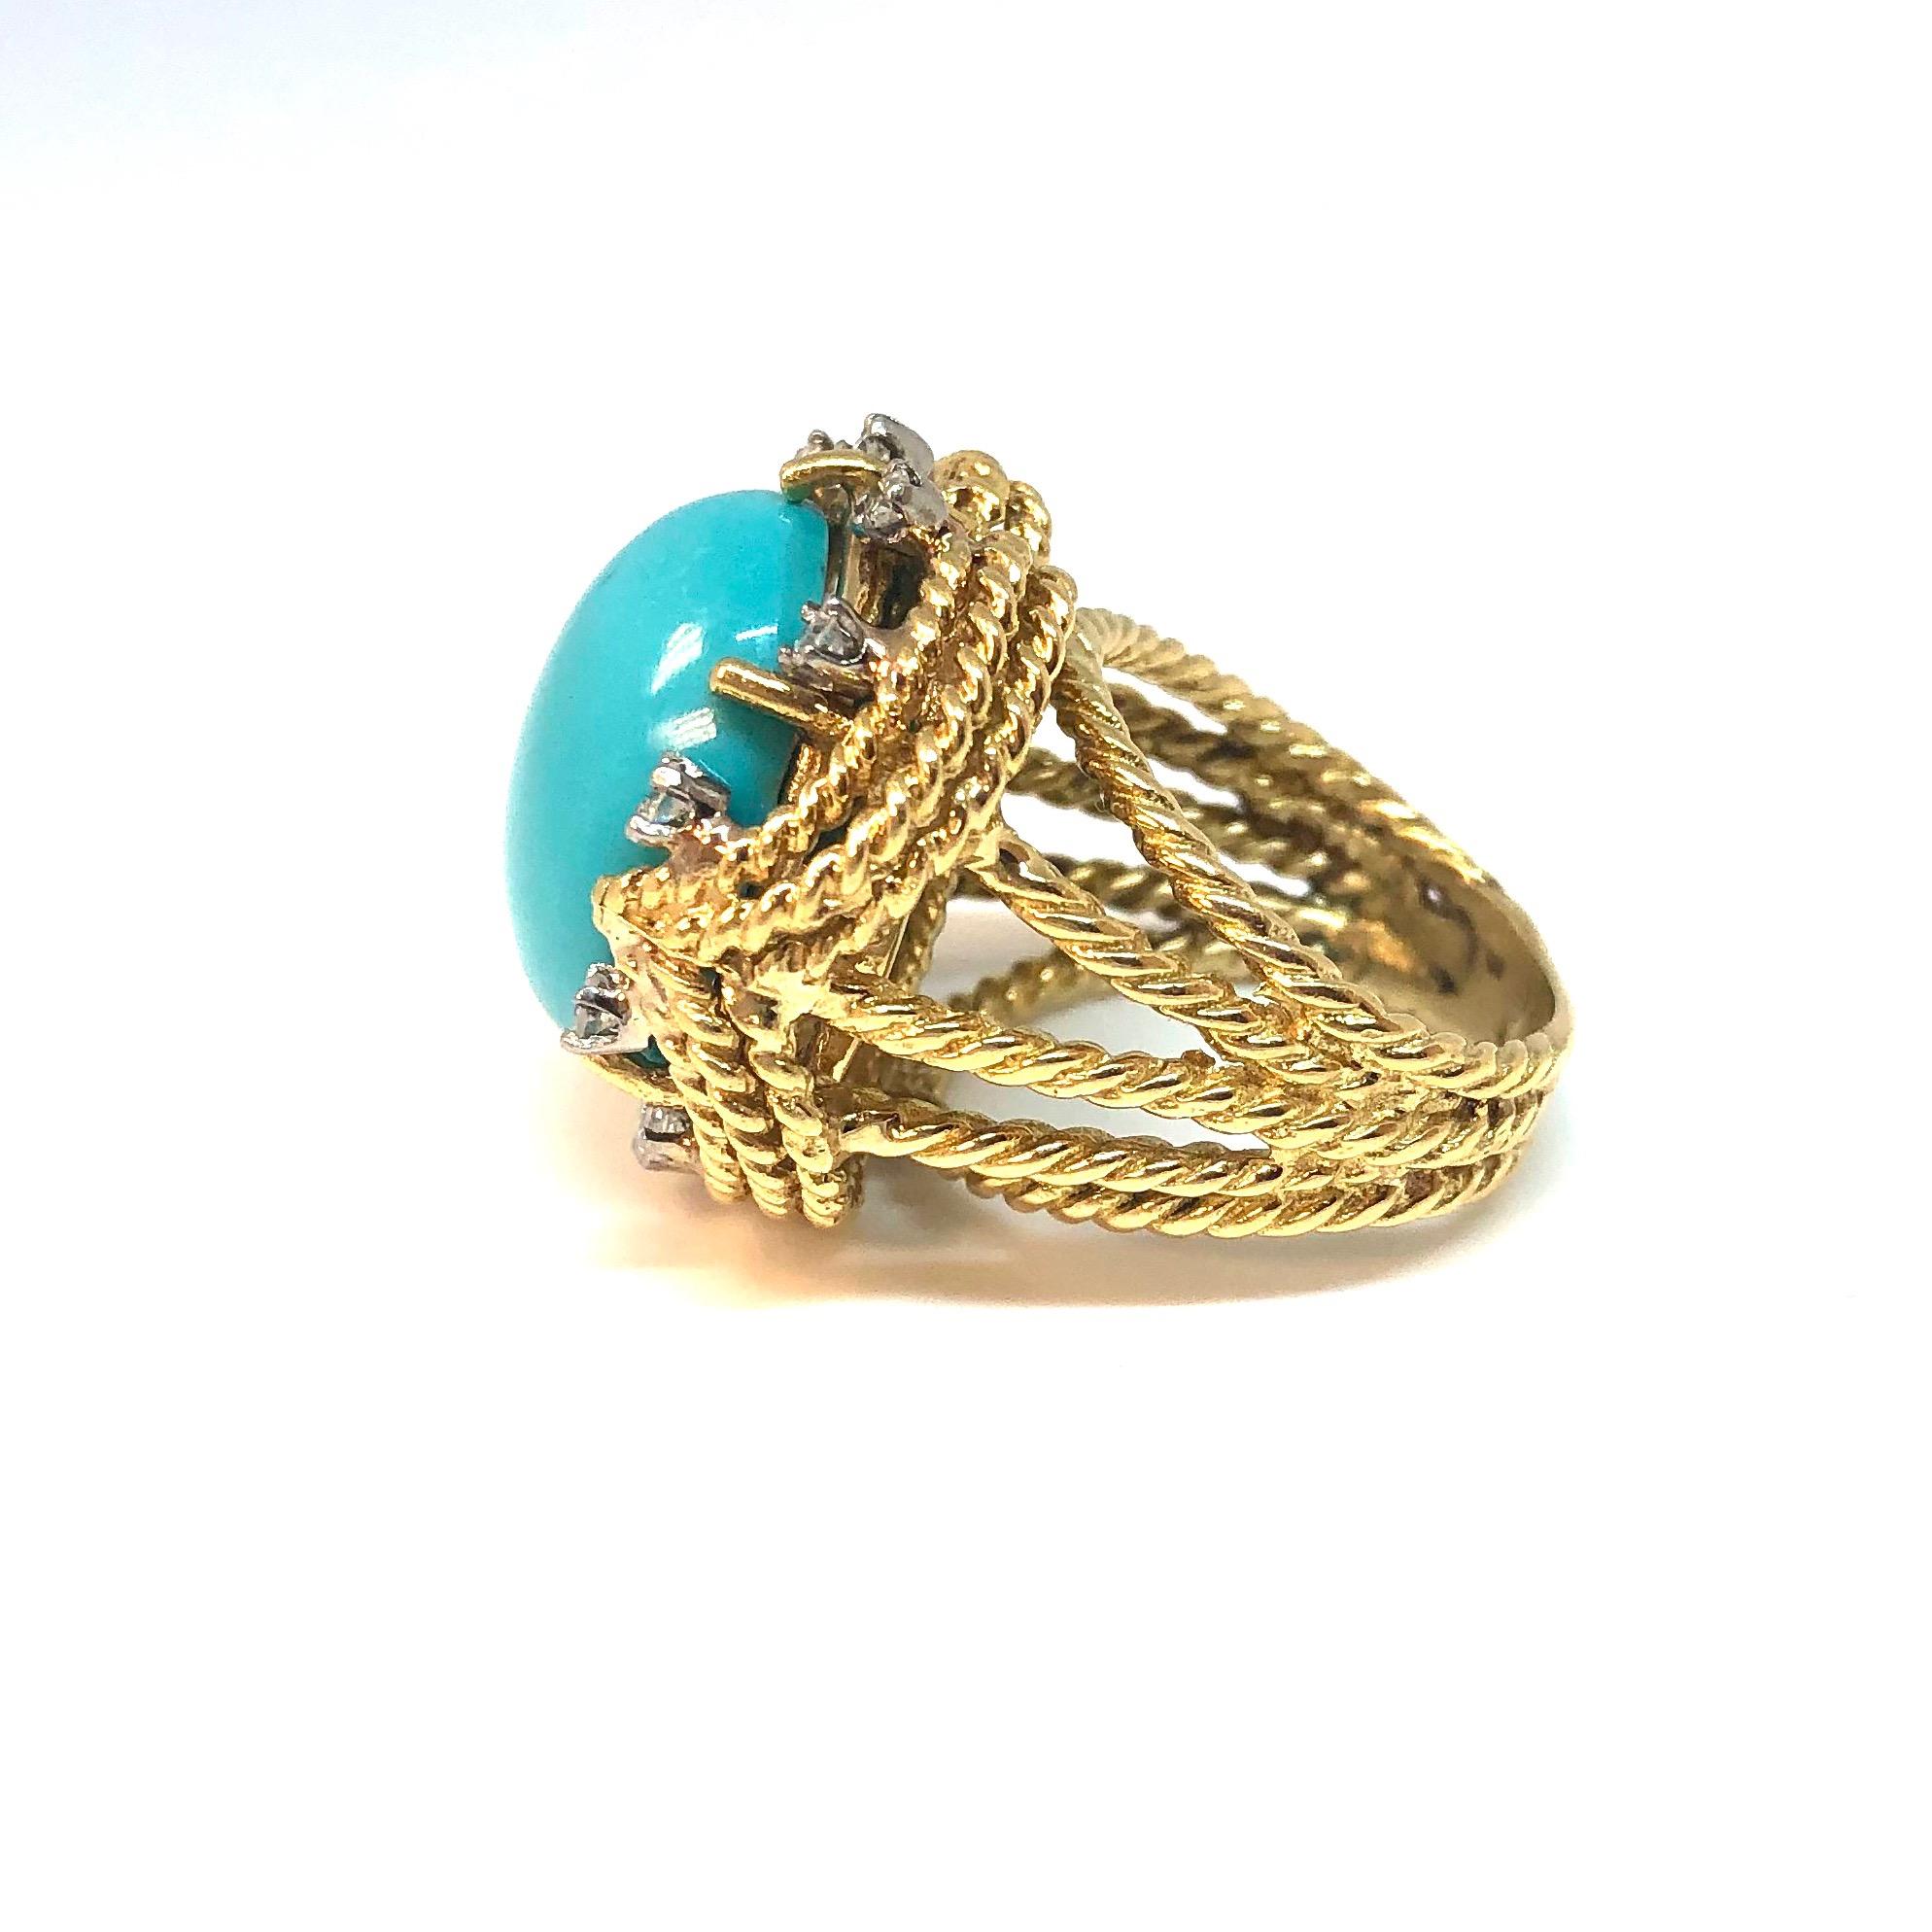 Vintage Turquoise and Diamond Gold Ring im Zustand „Gut“ im Angebot in Agoura Hills, CA